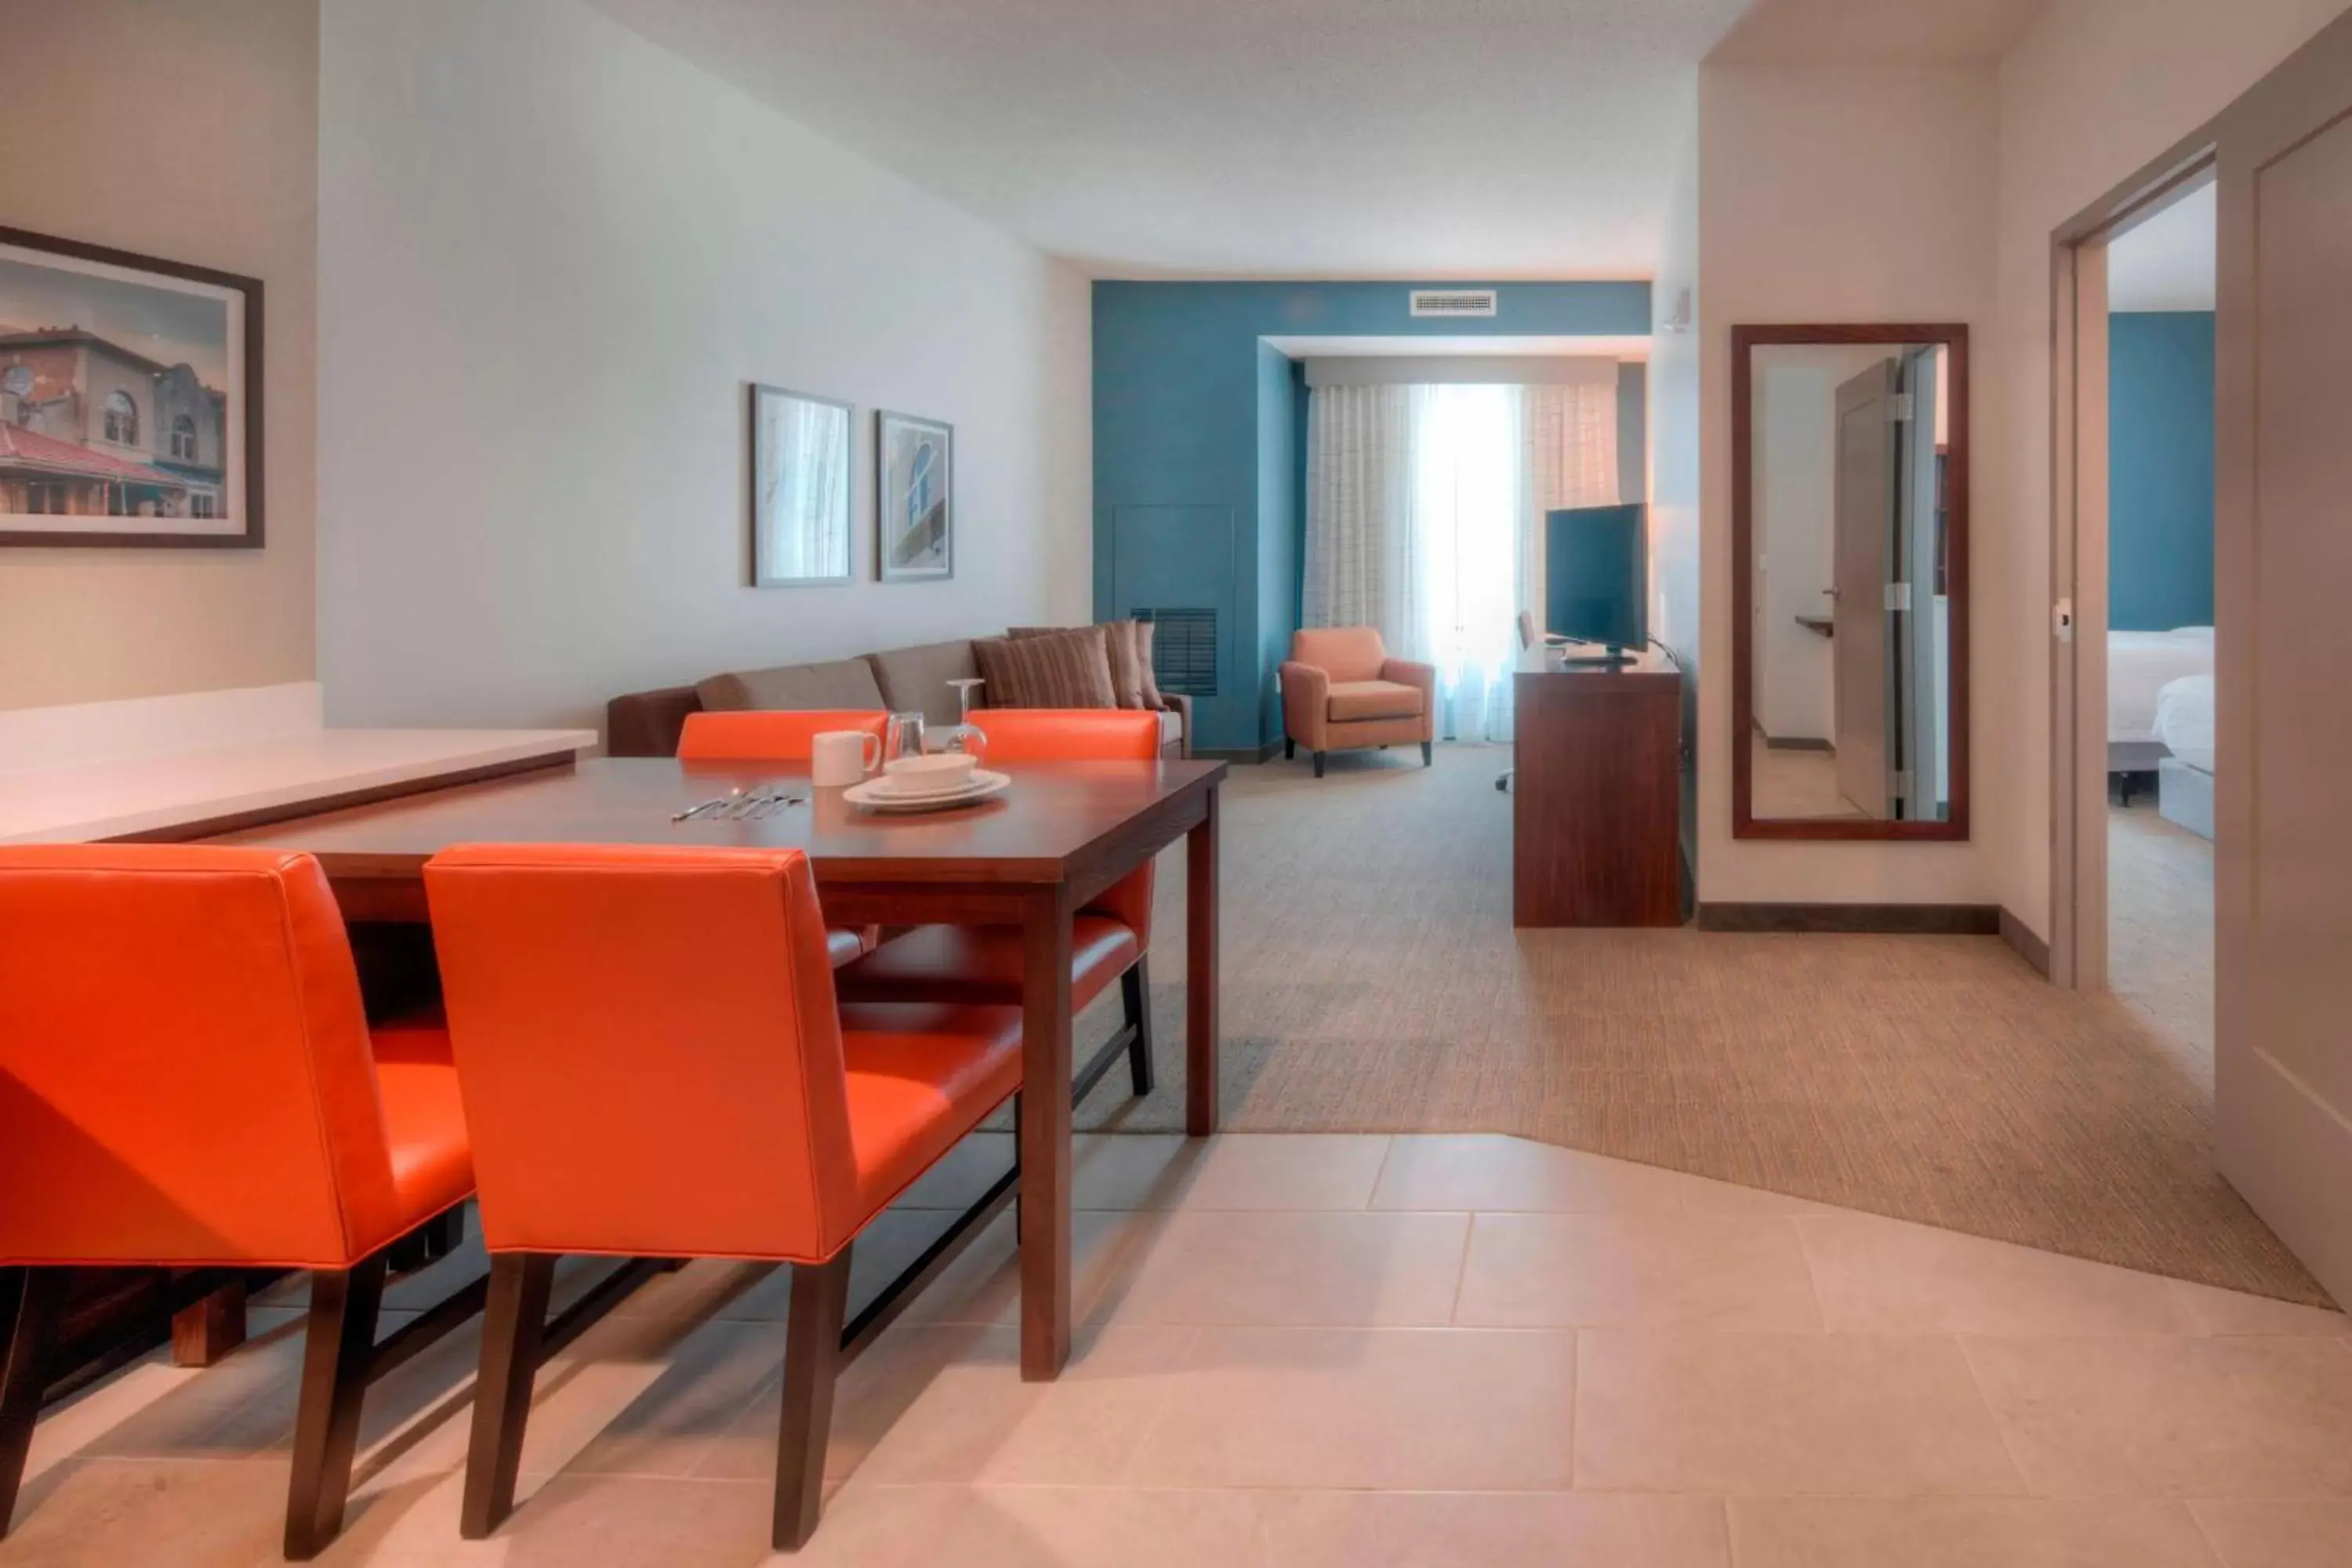 Bedroom, Dining Area in Residence Inn by Marriott Raleigh Downtown